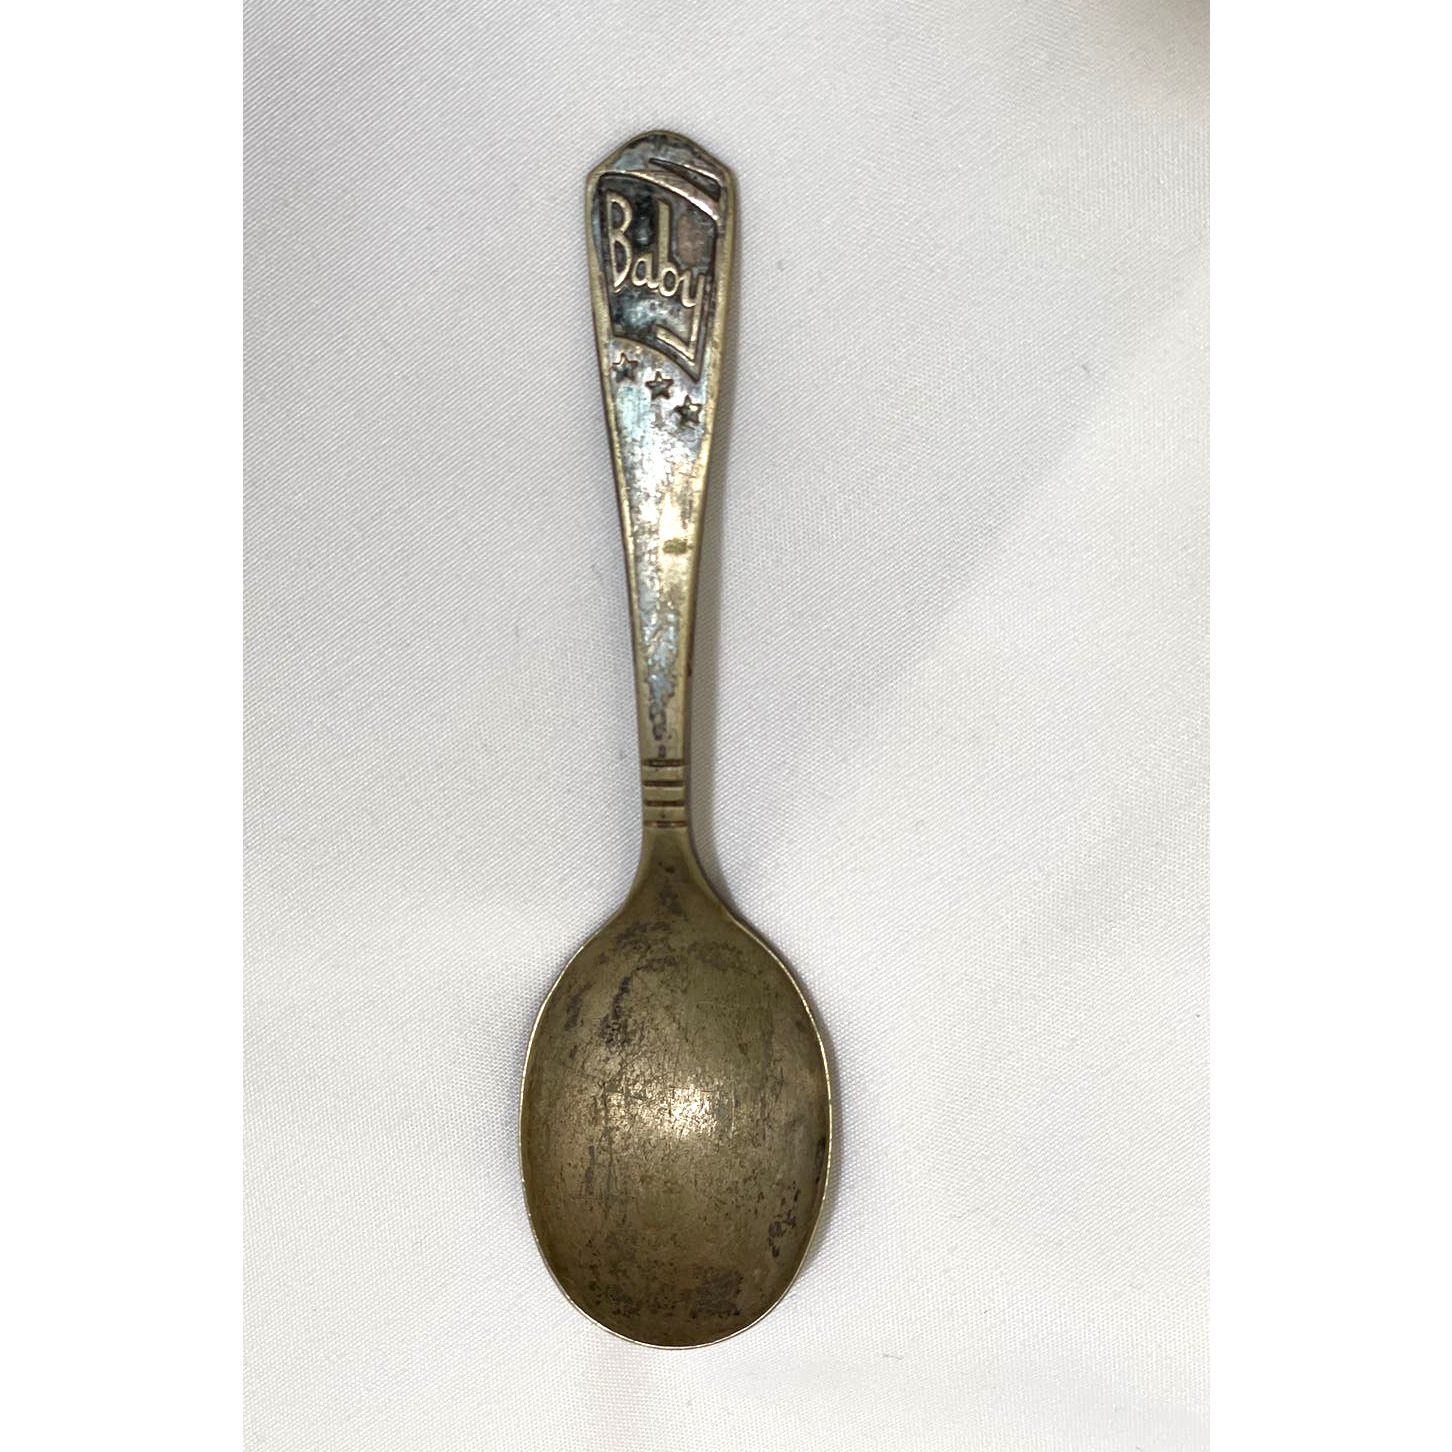 Vintage Antique Imperial Silver Plate Baby Mini Spoon 4 inches 1950’s